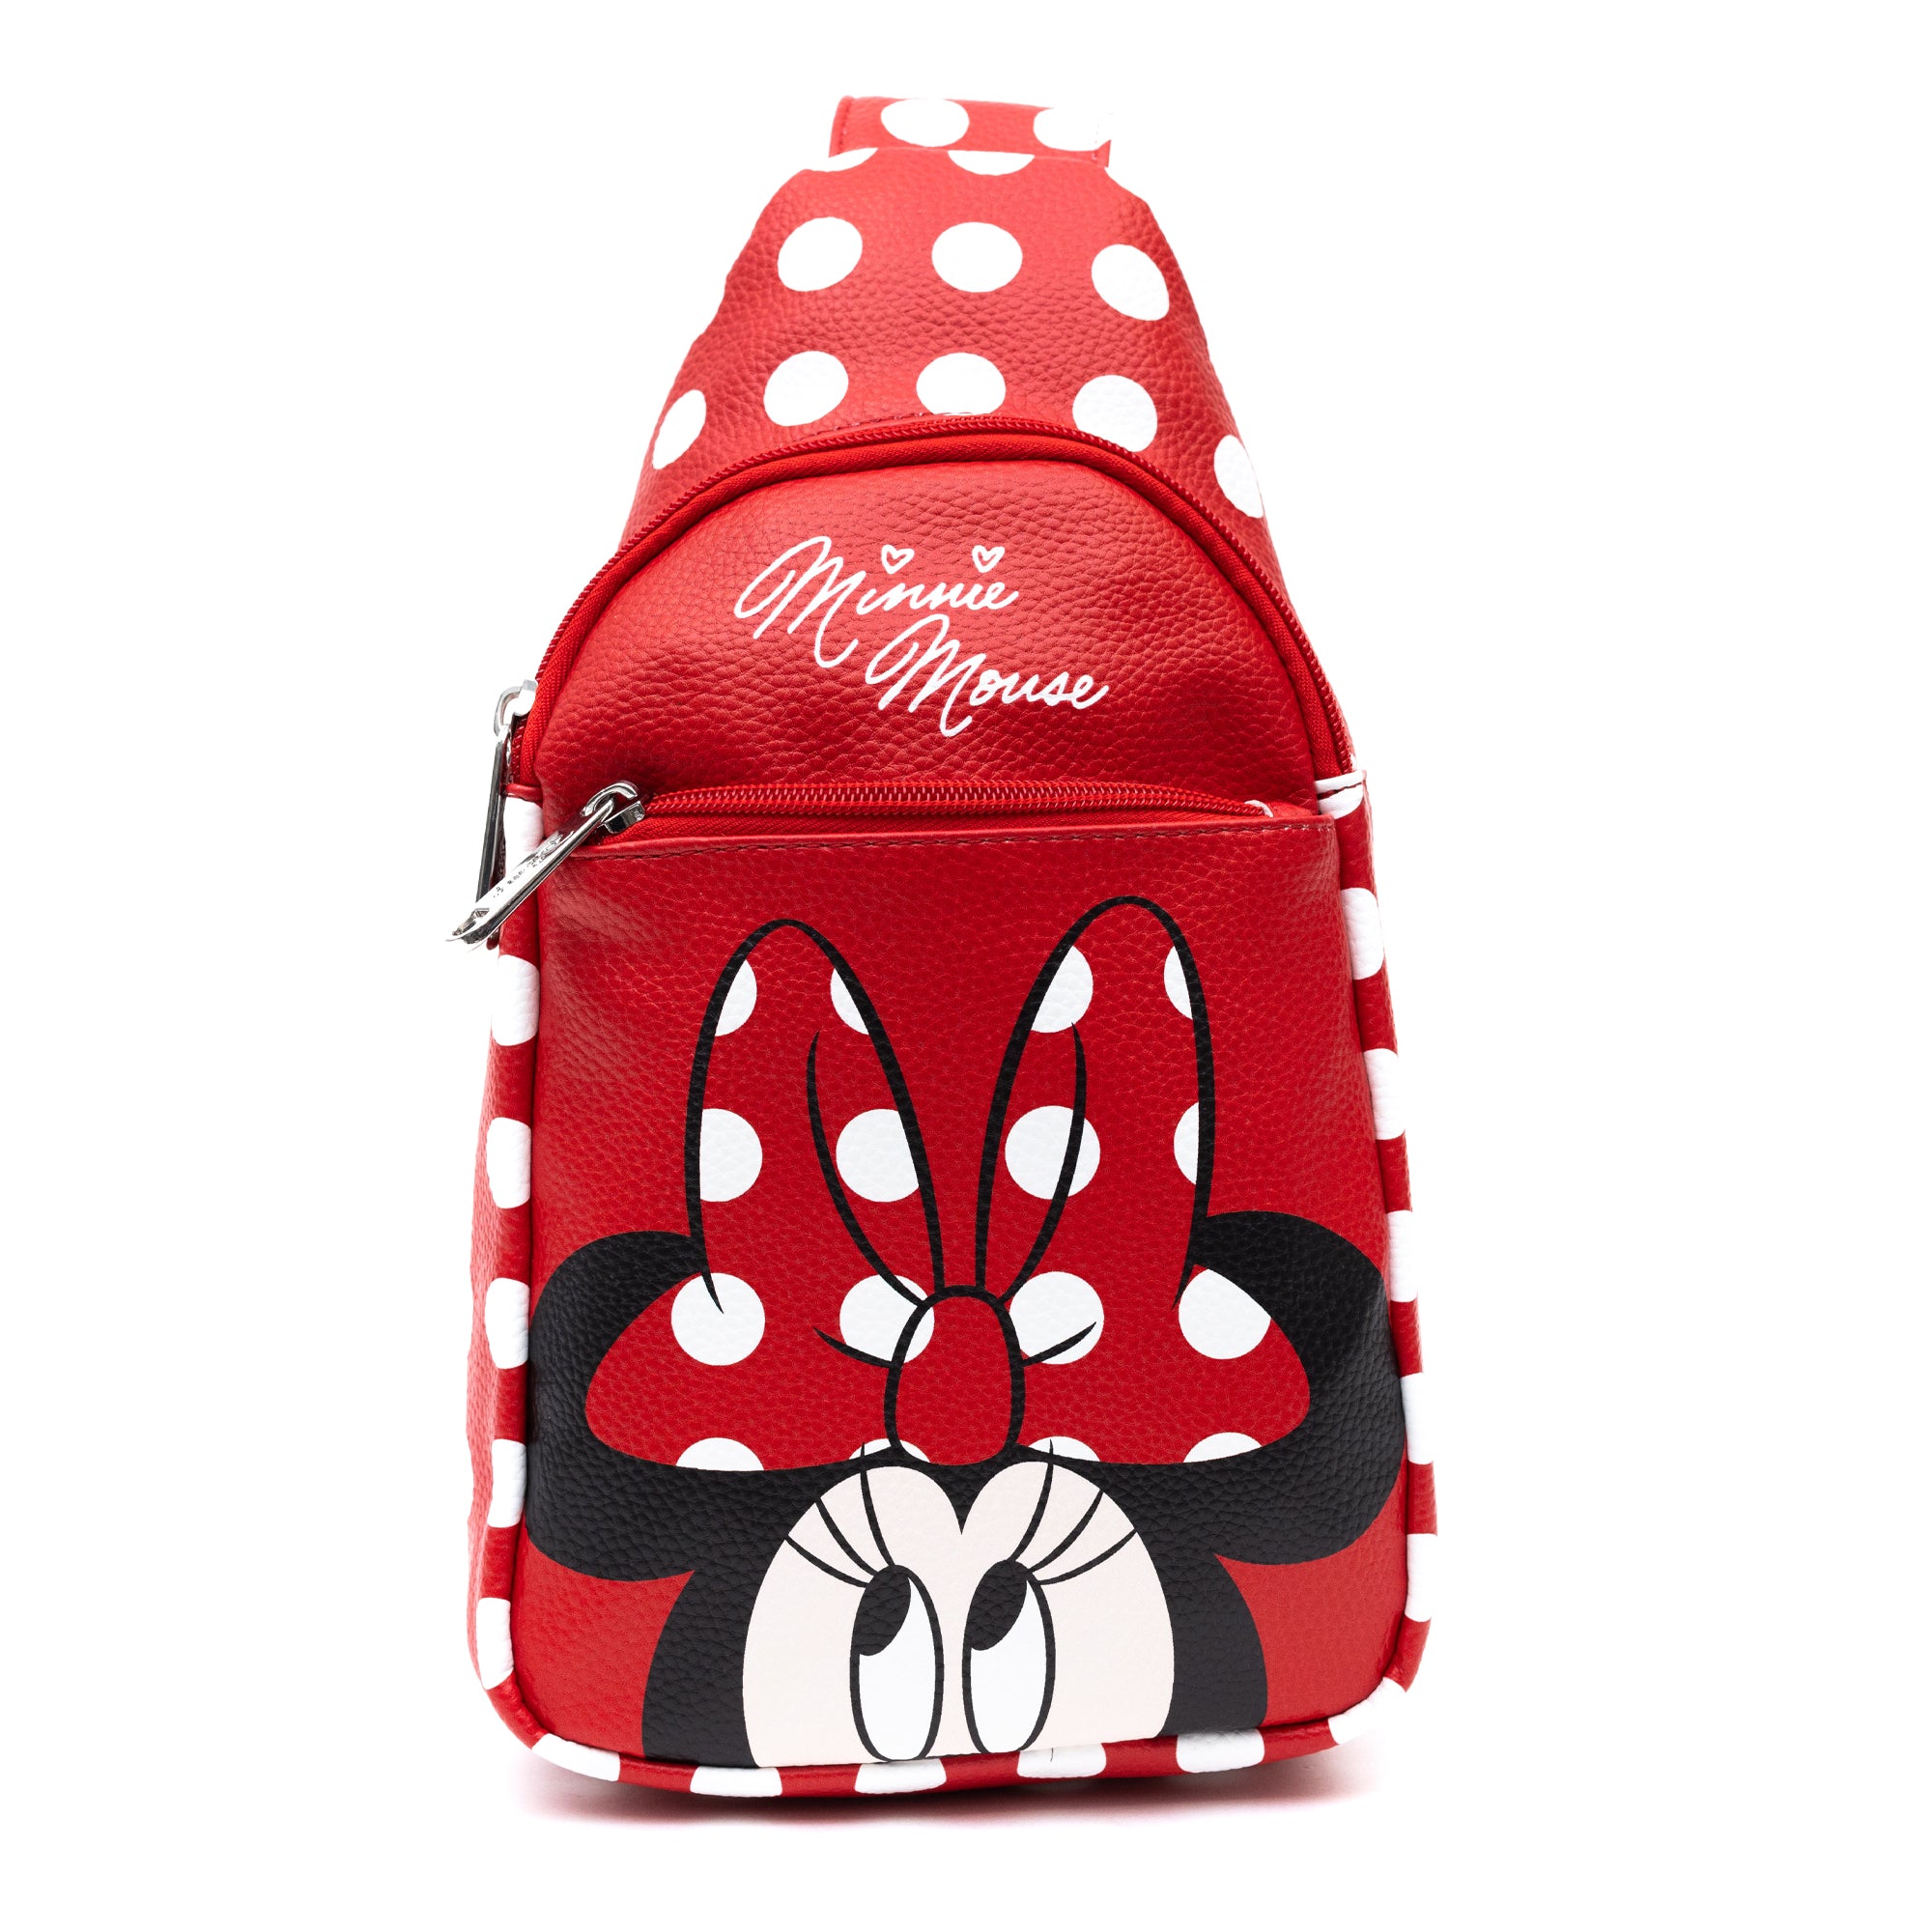 Disney Mickey Mouse And Minnie Mouse Love Story Handbag - The